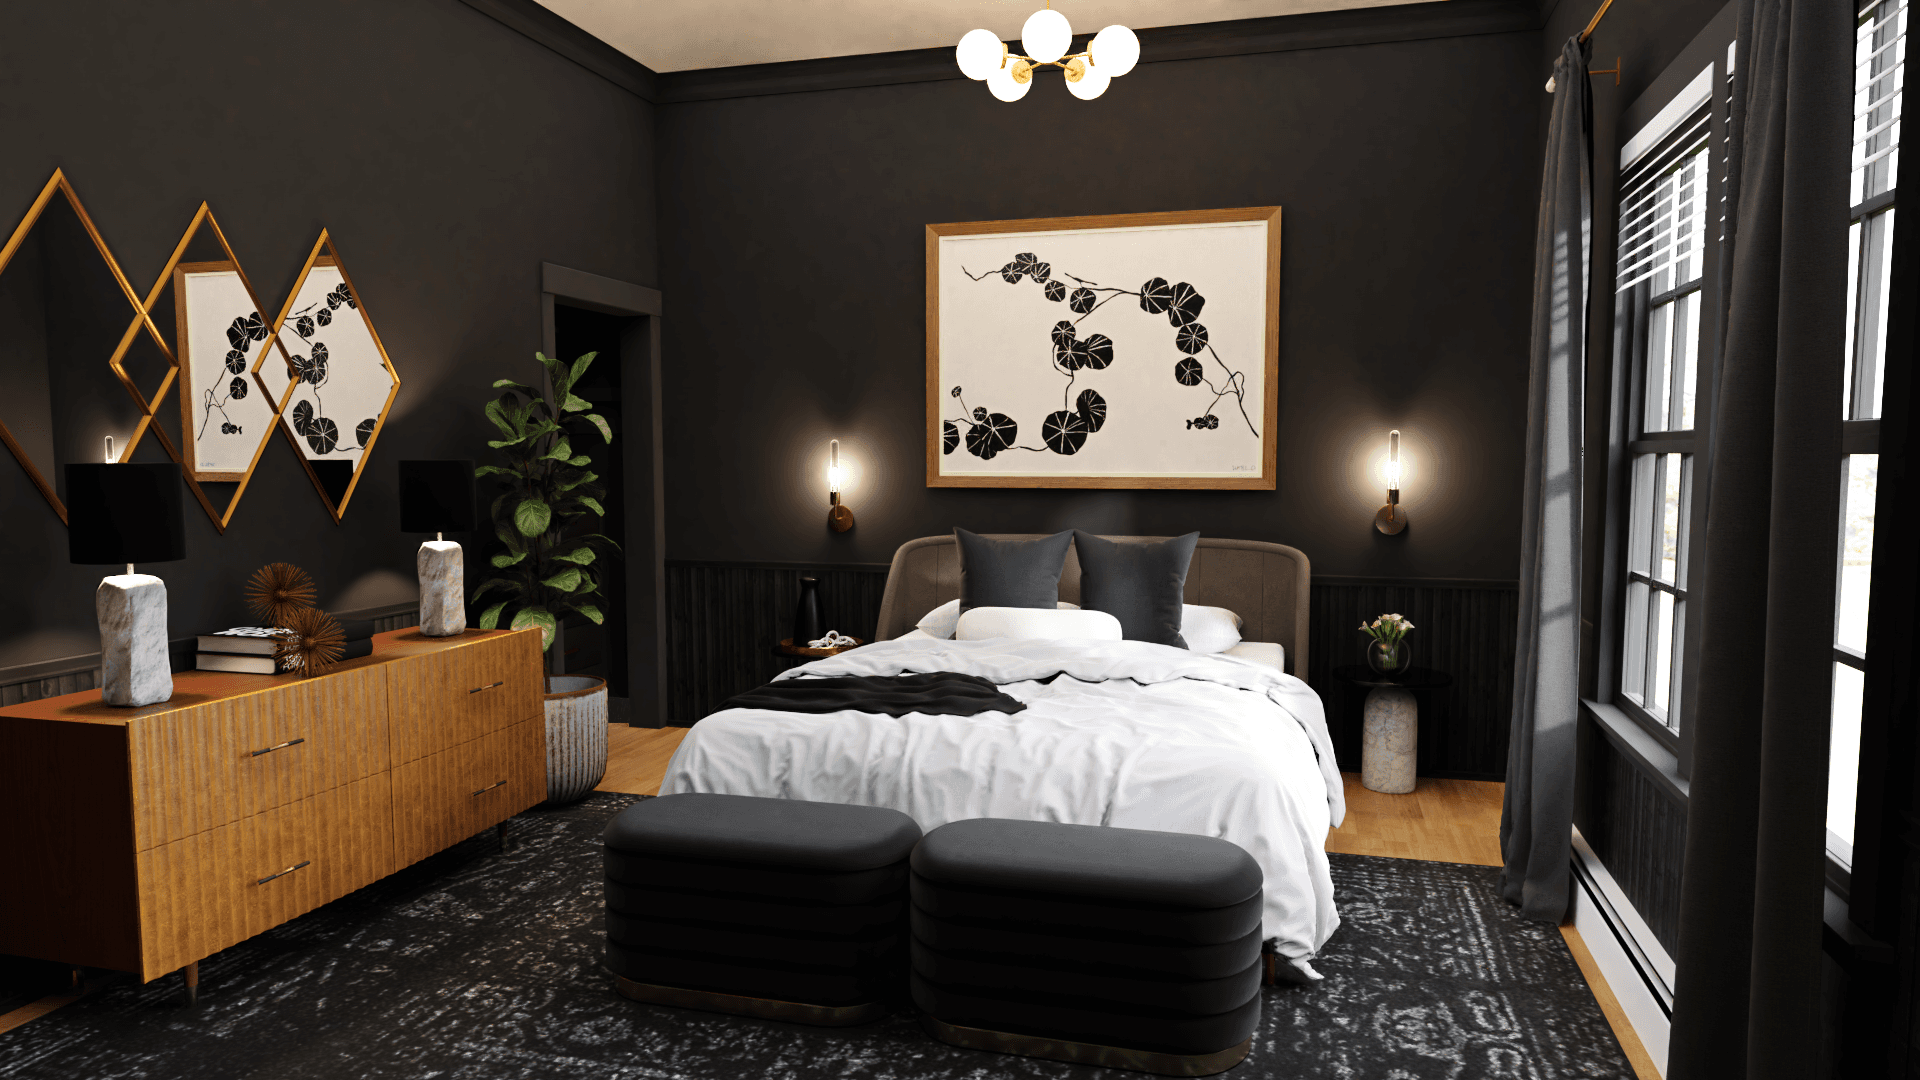 An Art Deco Glam Bedroom With Bold Walls & Metallic Accents